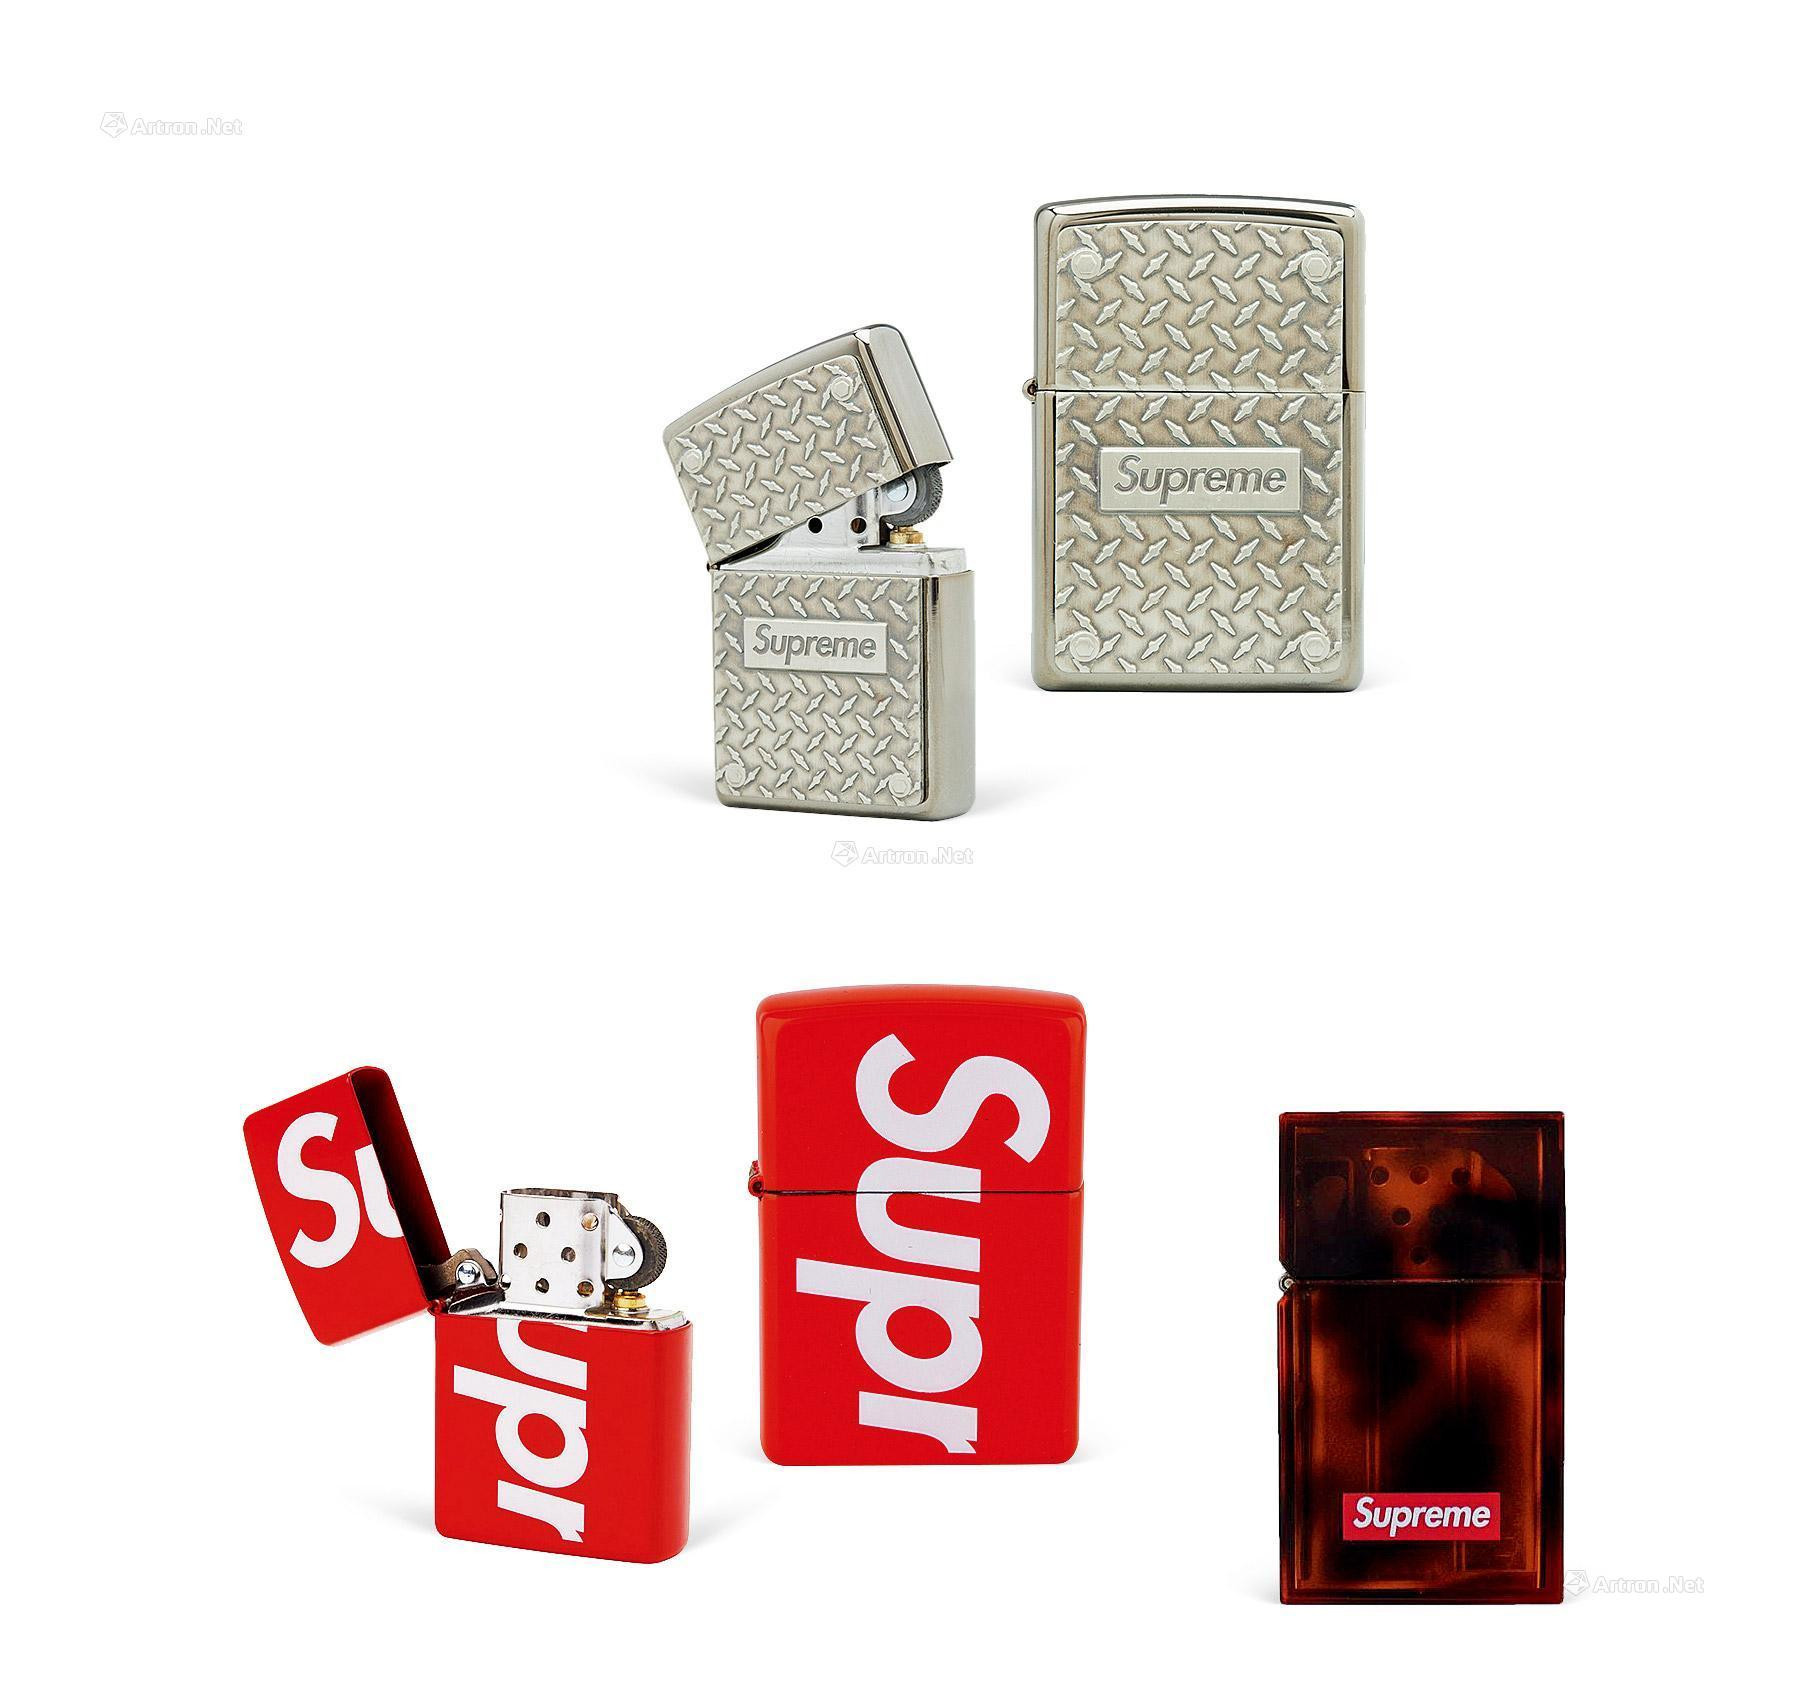 SUPREME　ZIPPO LIGHTERS，3 PIECES IN TOTAL，18SS